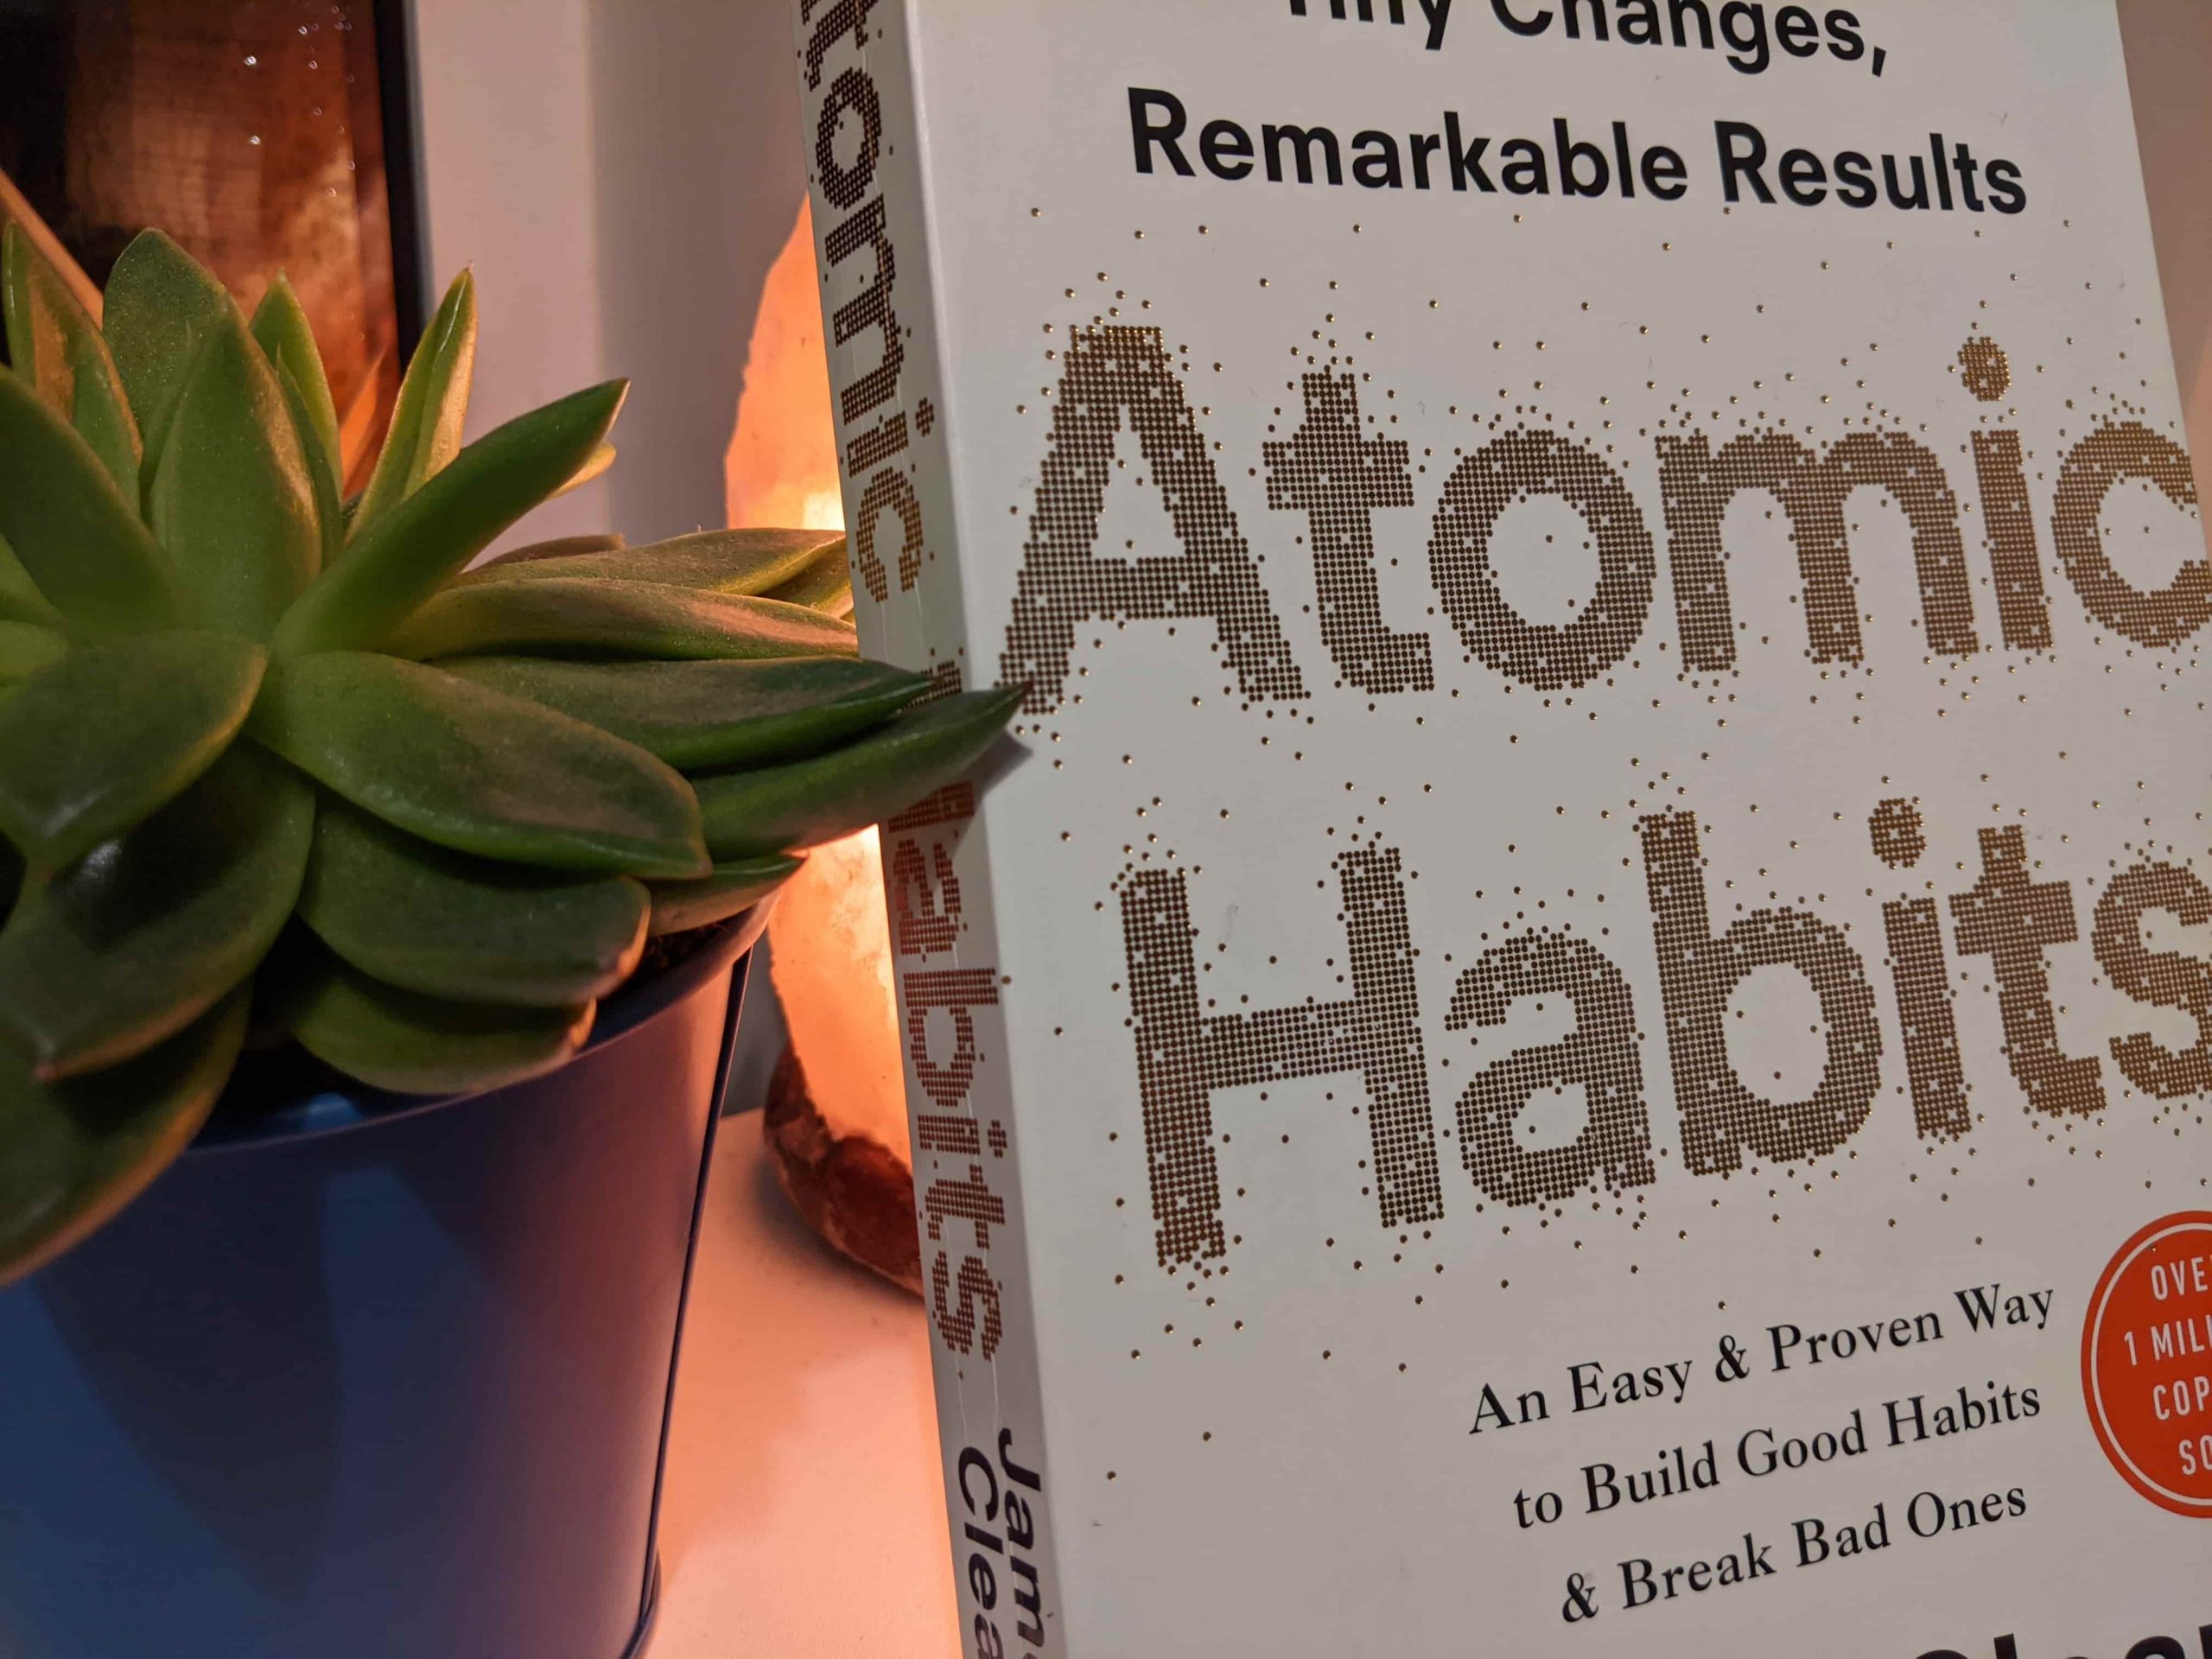 Atomic Habits (James Clear) - Book Summary, Notes & Highlights